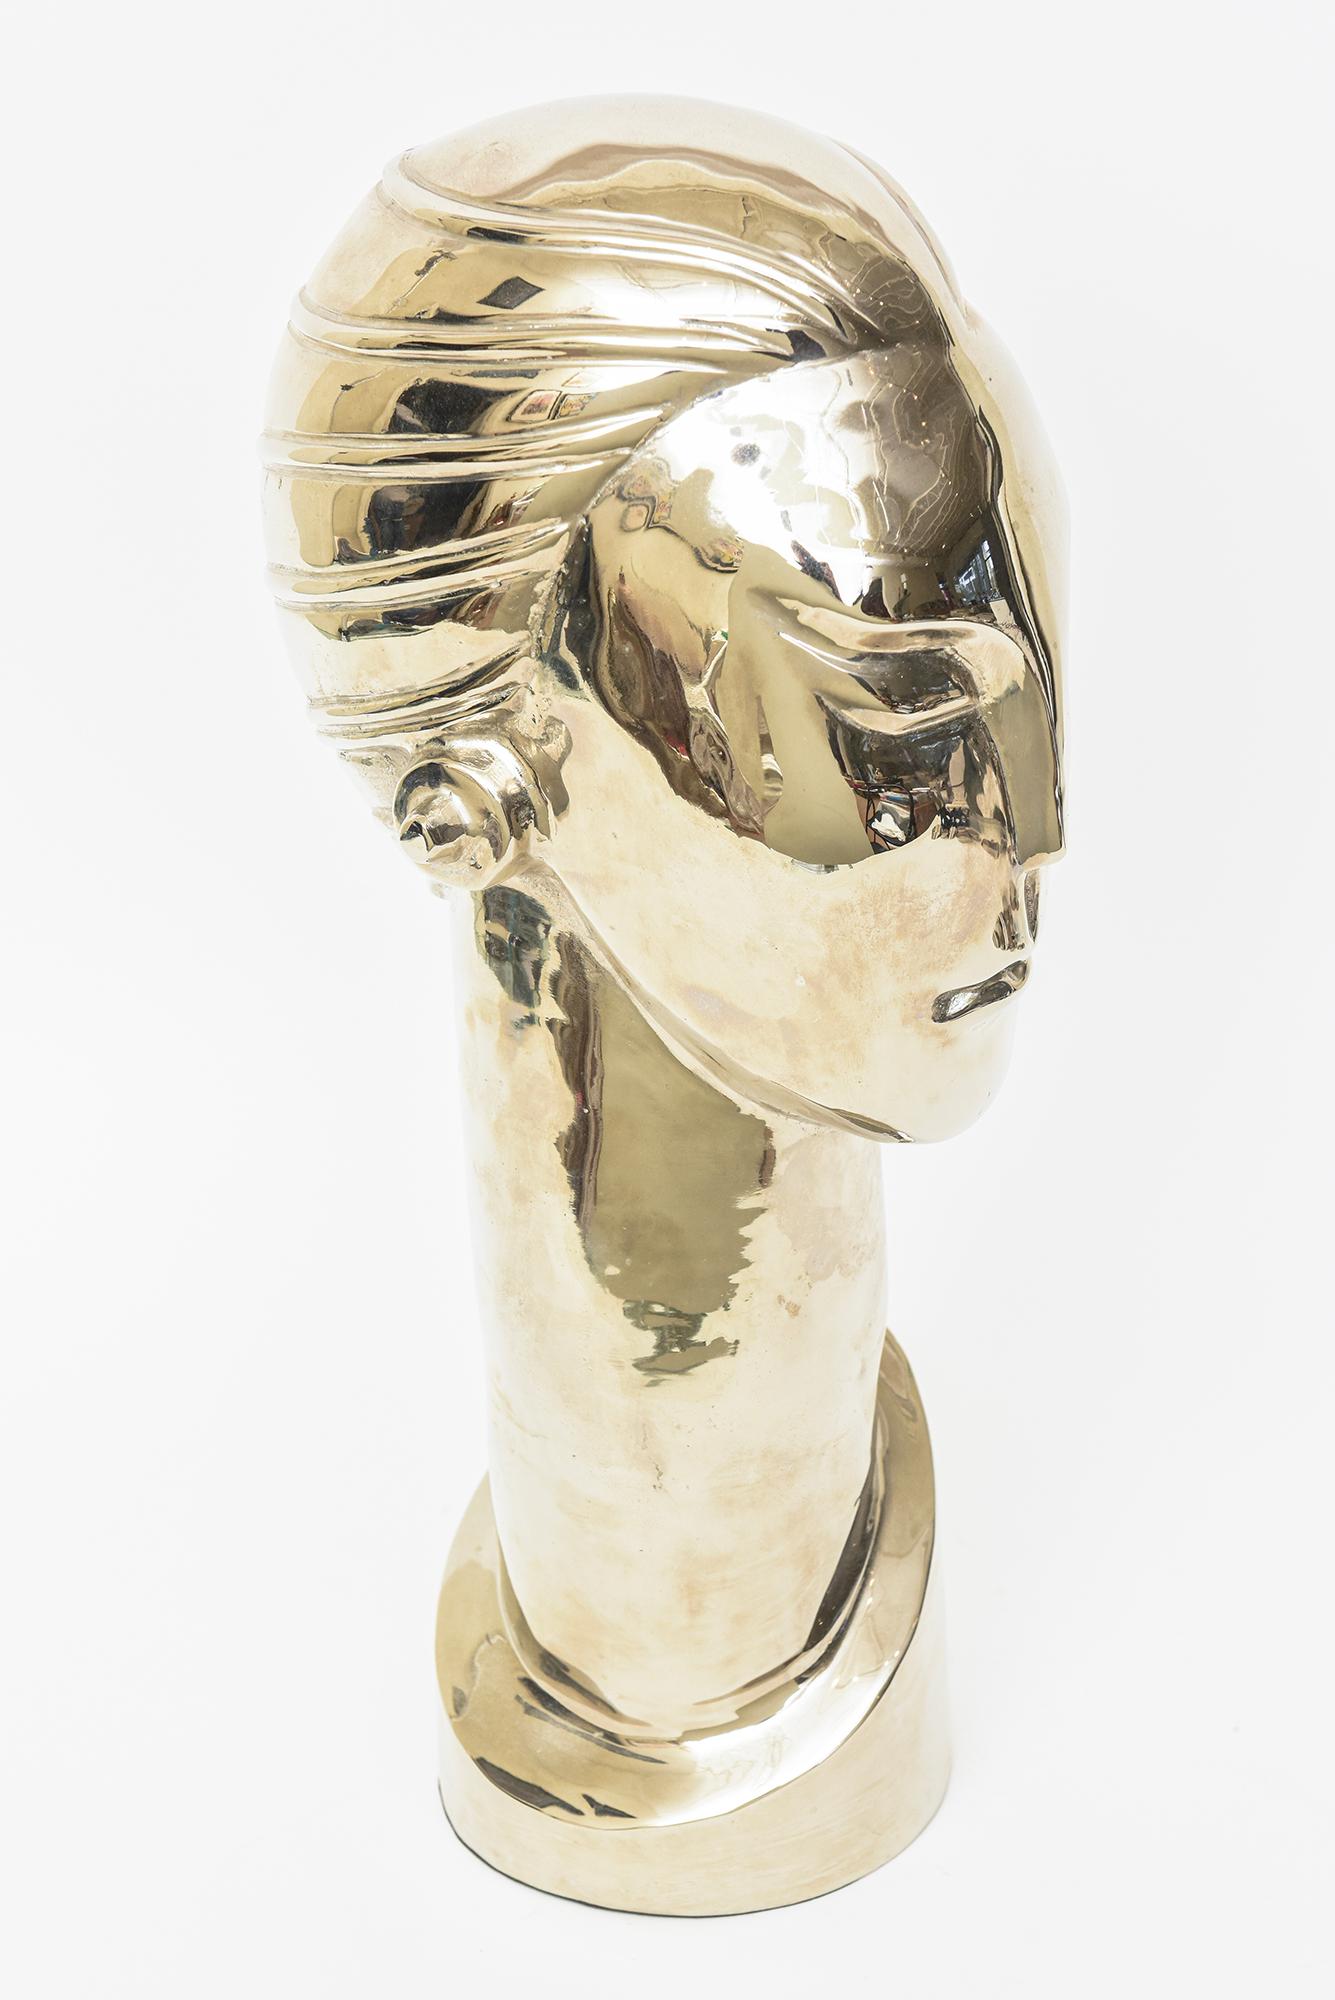 Nickel Silver Over Brass Art Deco Stylized Tall Head Bust Figurative Sculpture  In Good Condition For Sale In North Miami, FL